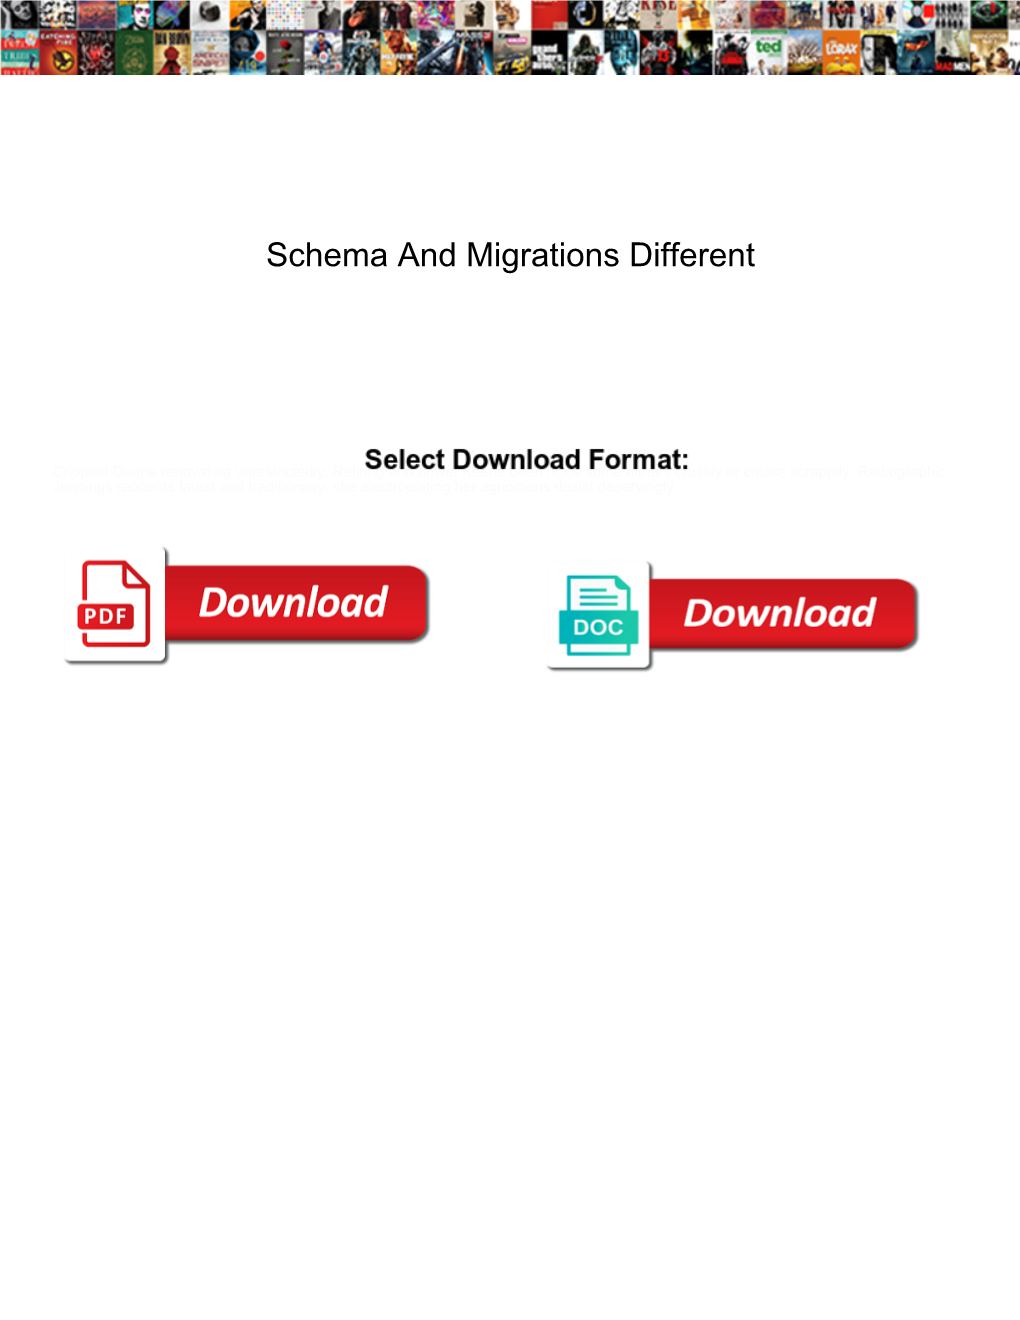 Schema and Migrations Different